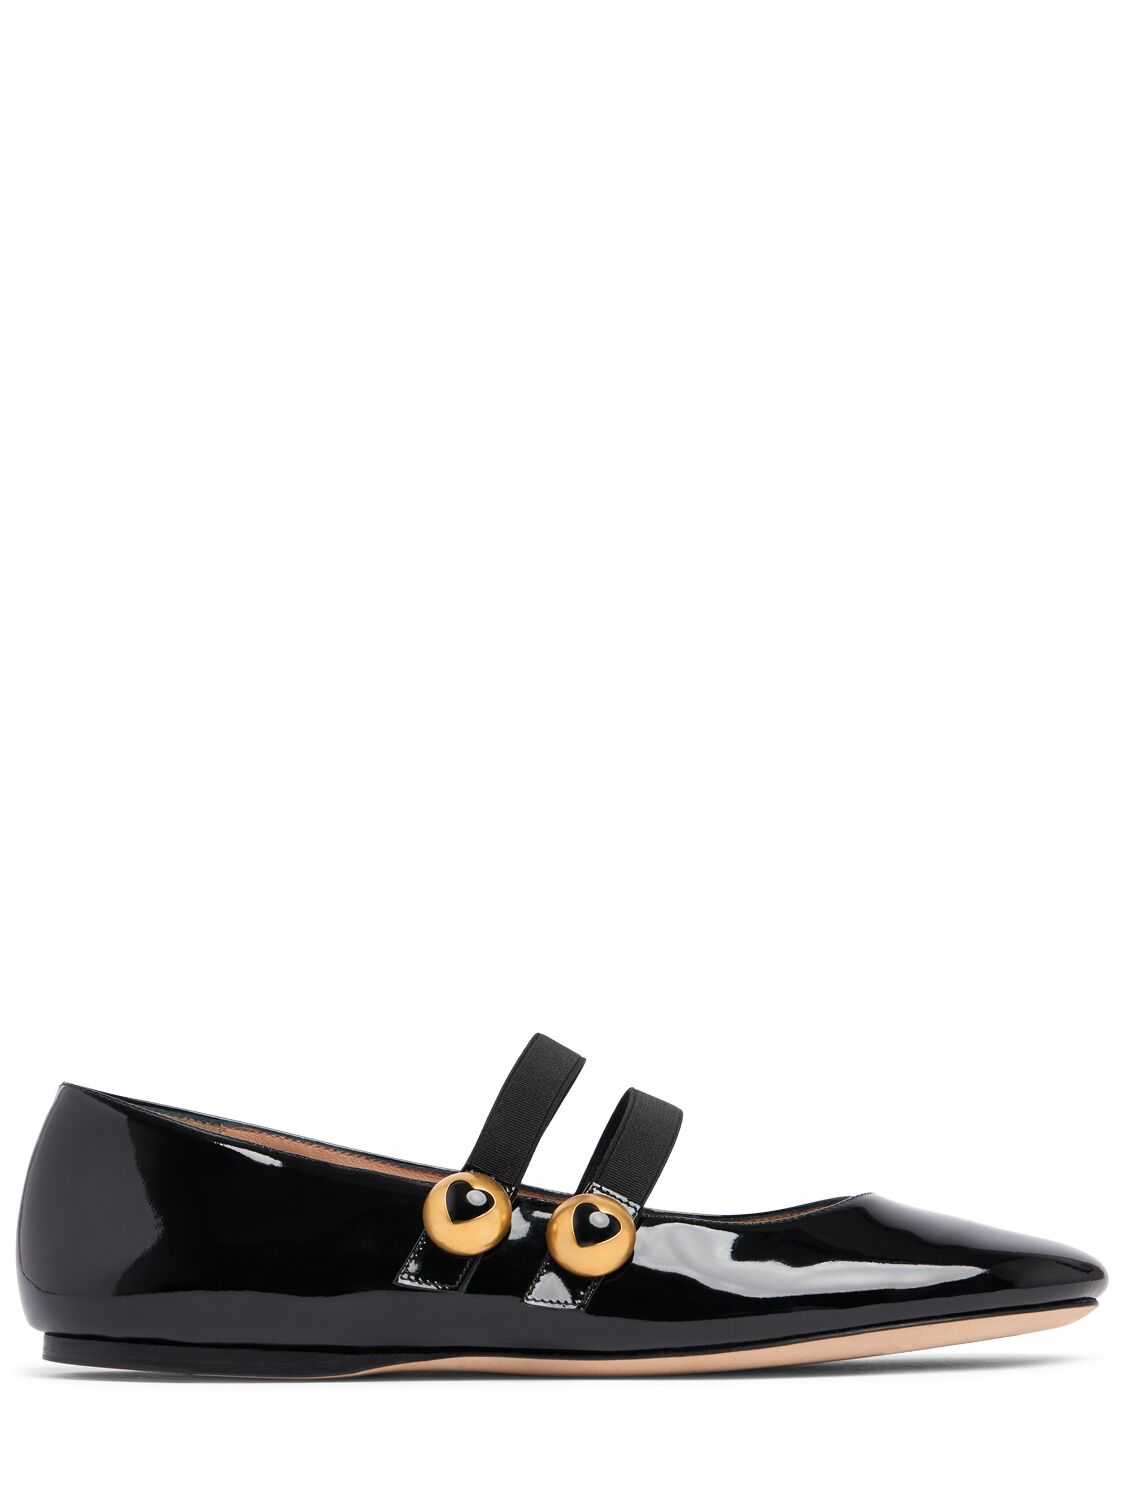 Moschino 5mm Patent Leather Flats In Black